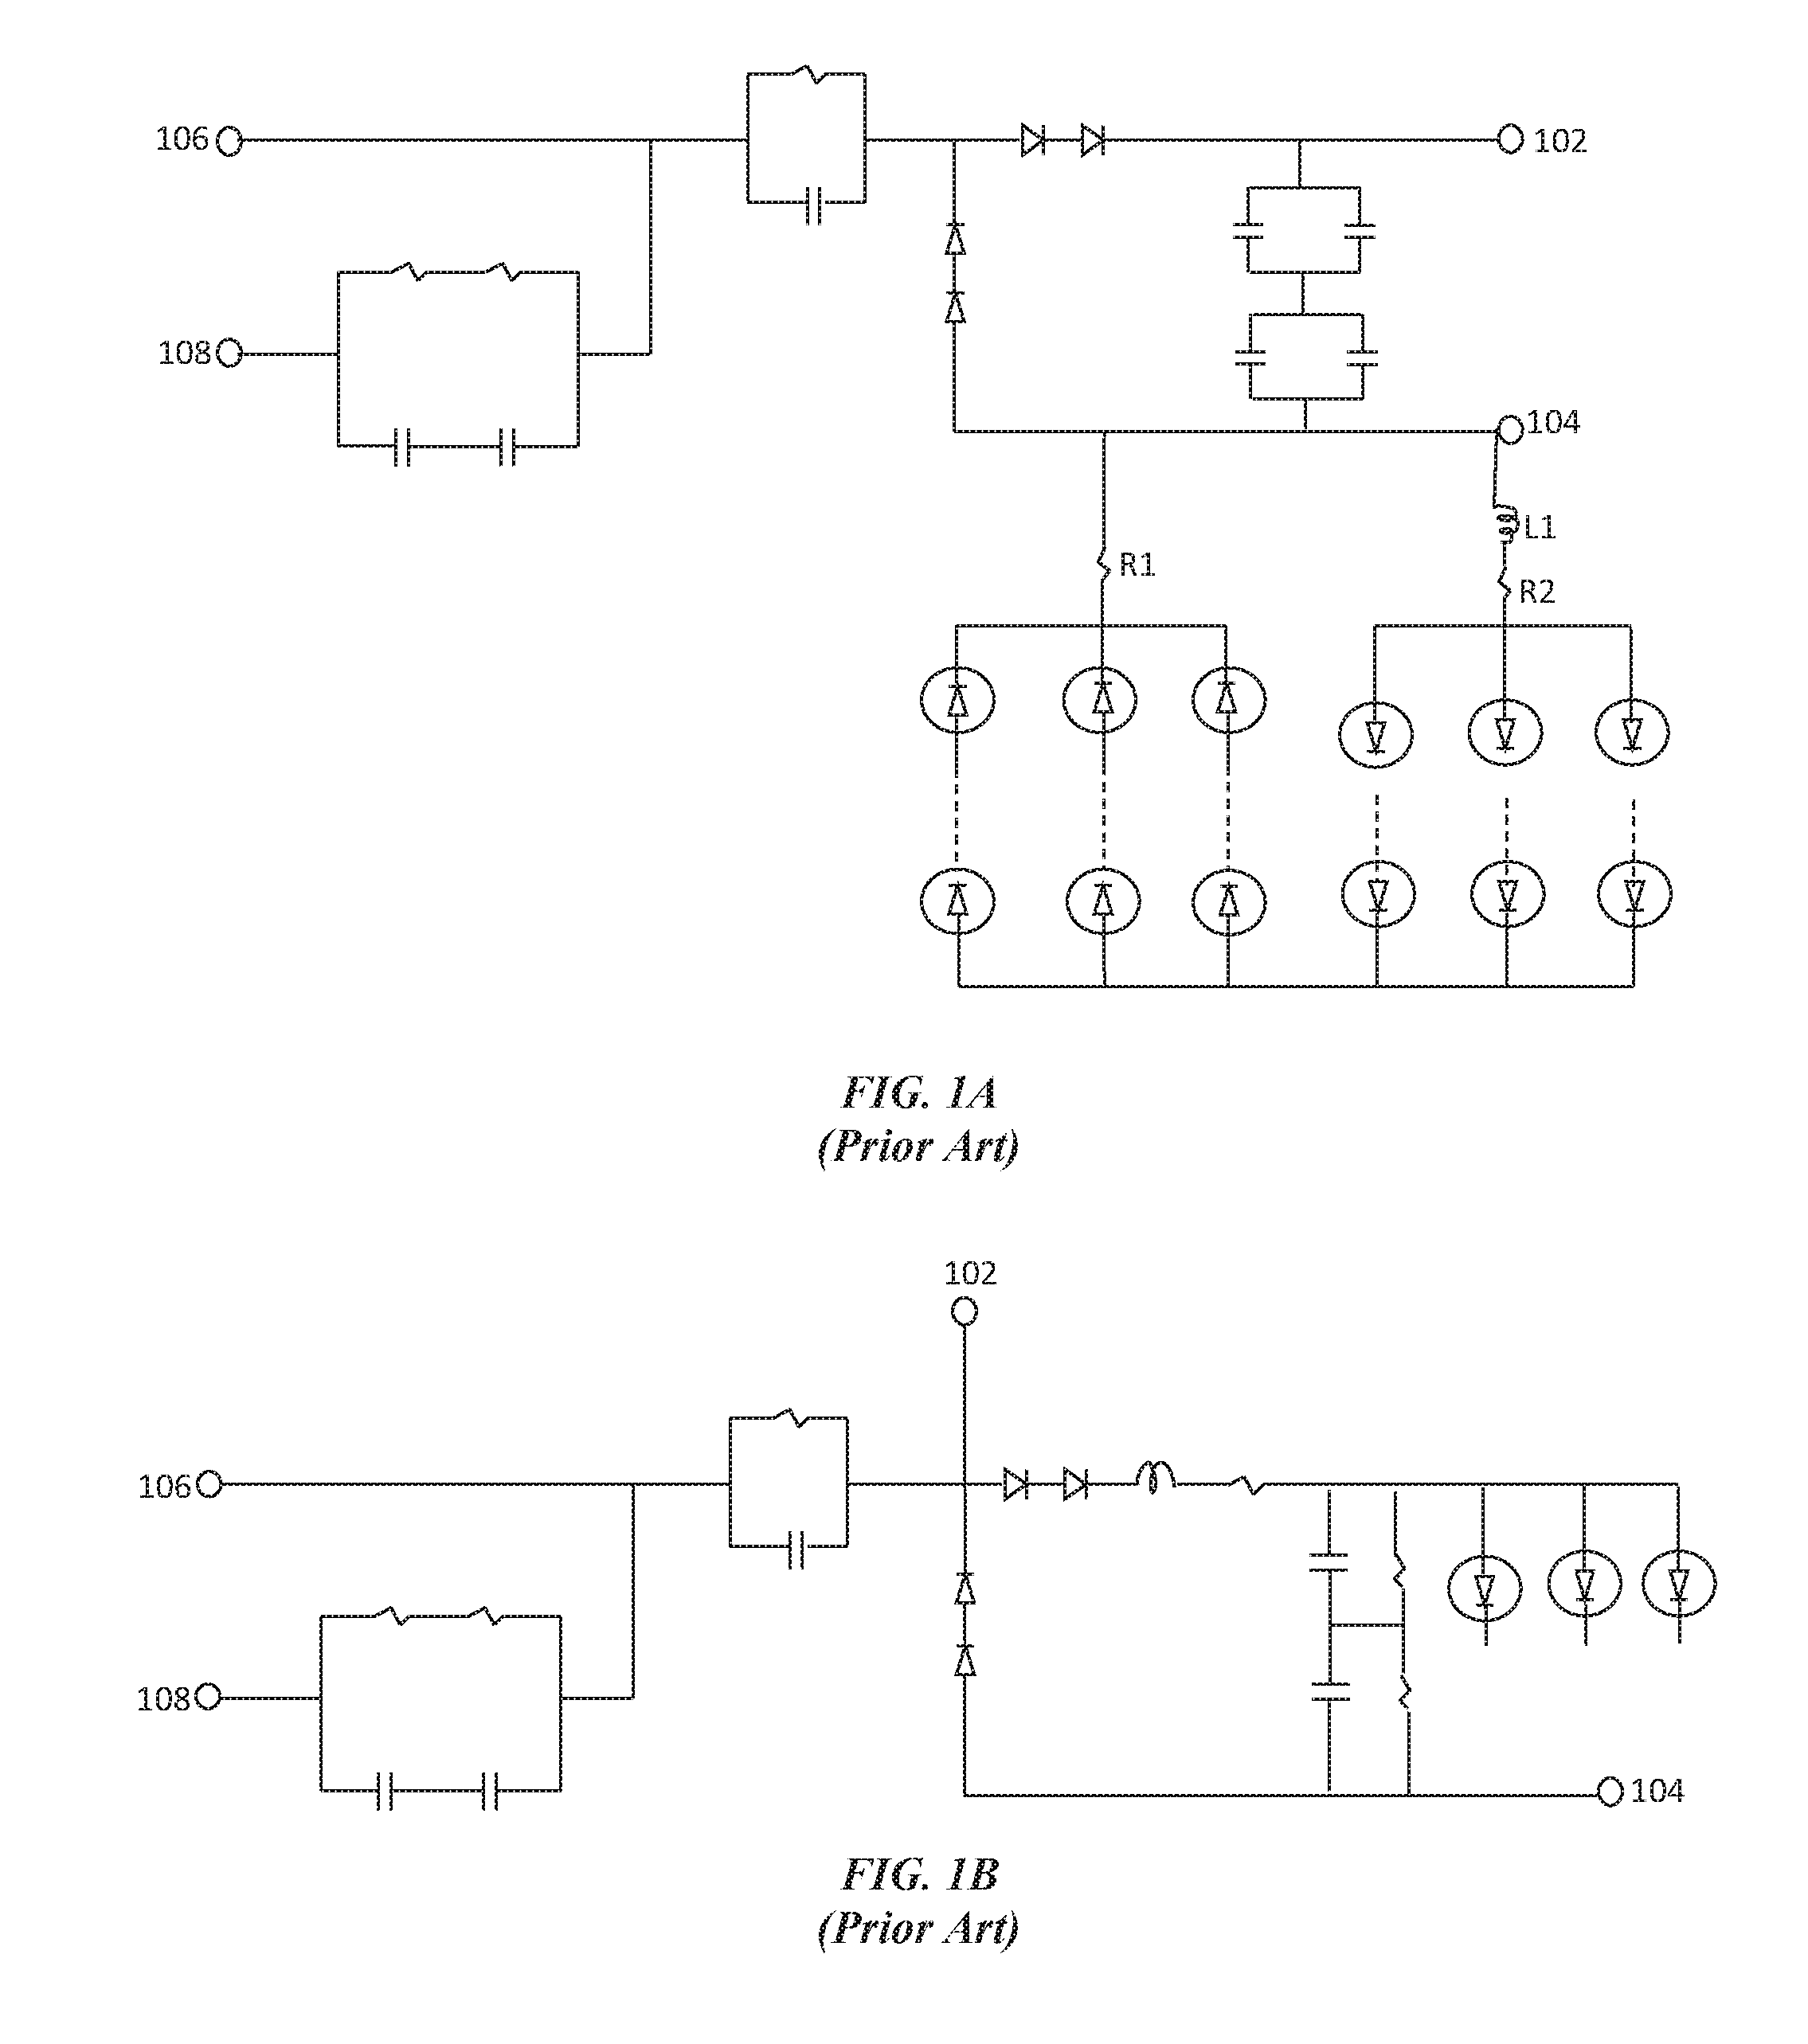 ANSI reference ballast compliance circuit for LED retrofit lamps